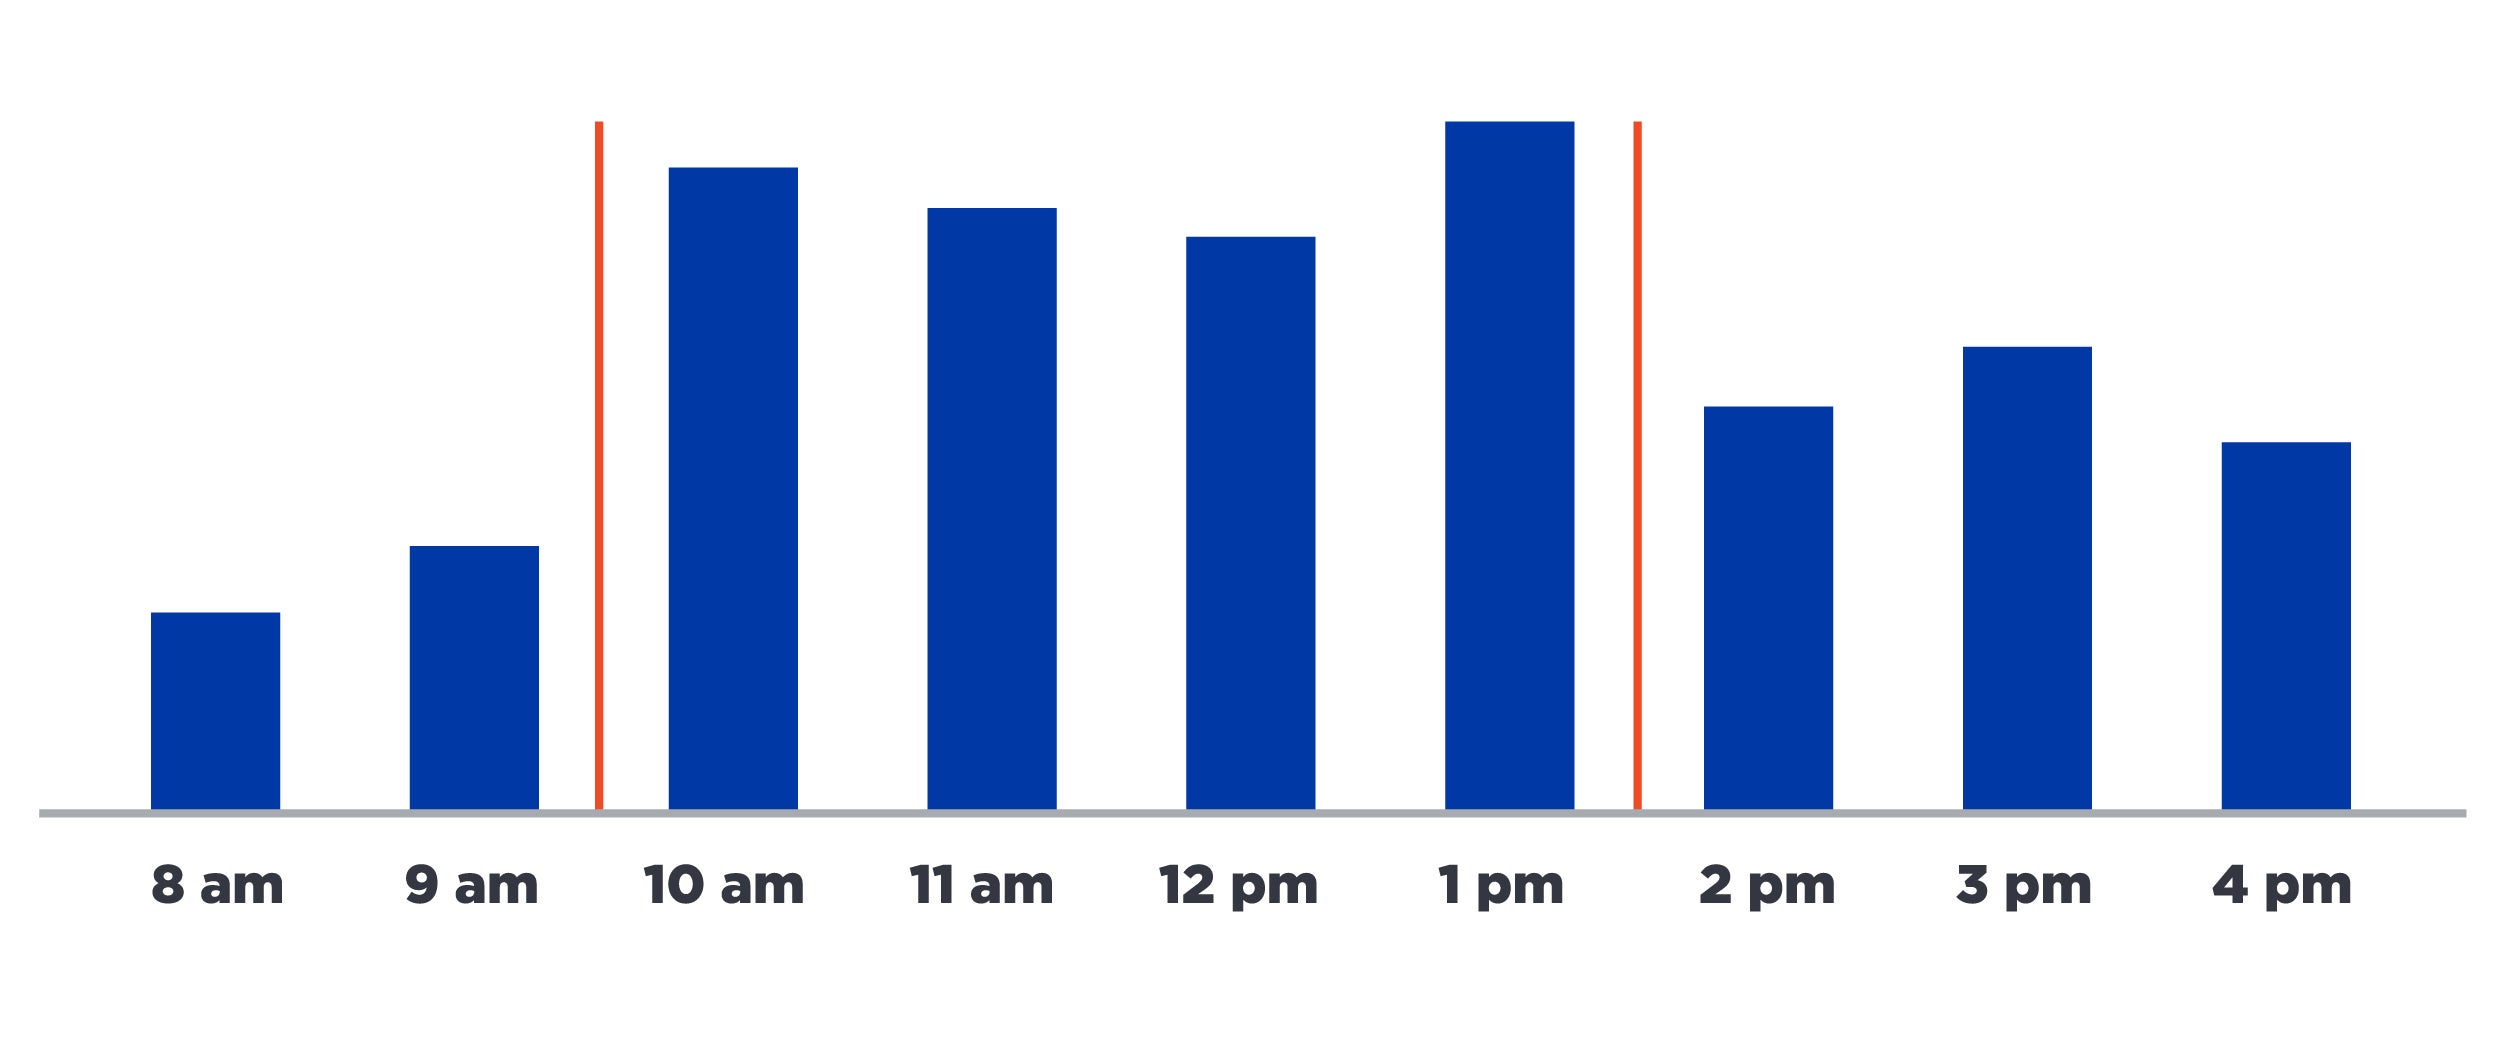 Urgent care visits bar graph reflectin the busiest times in the clinic between 10am-2pm.